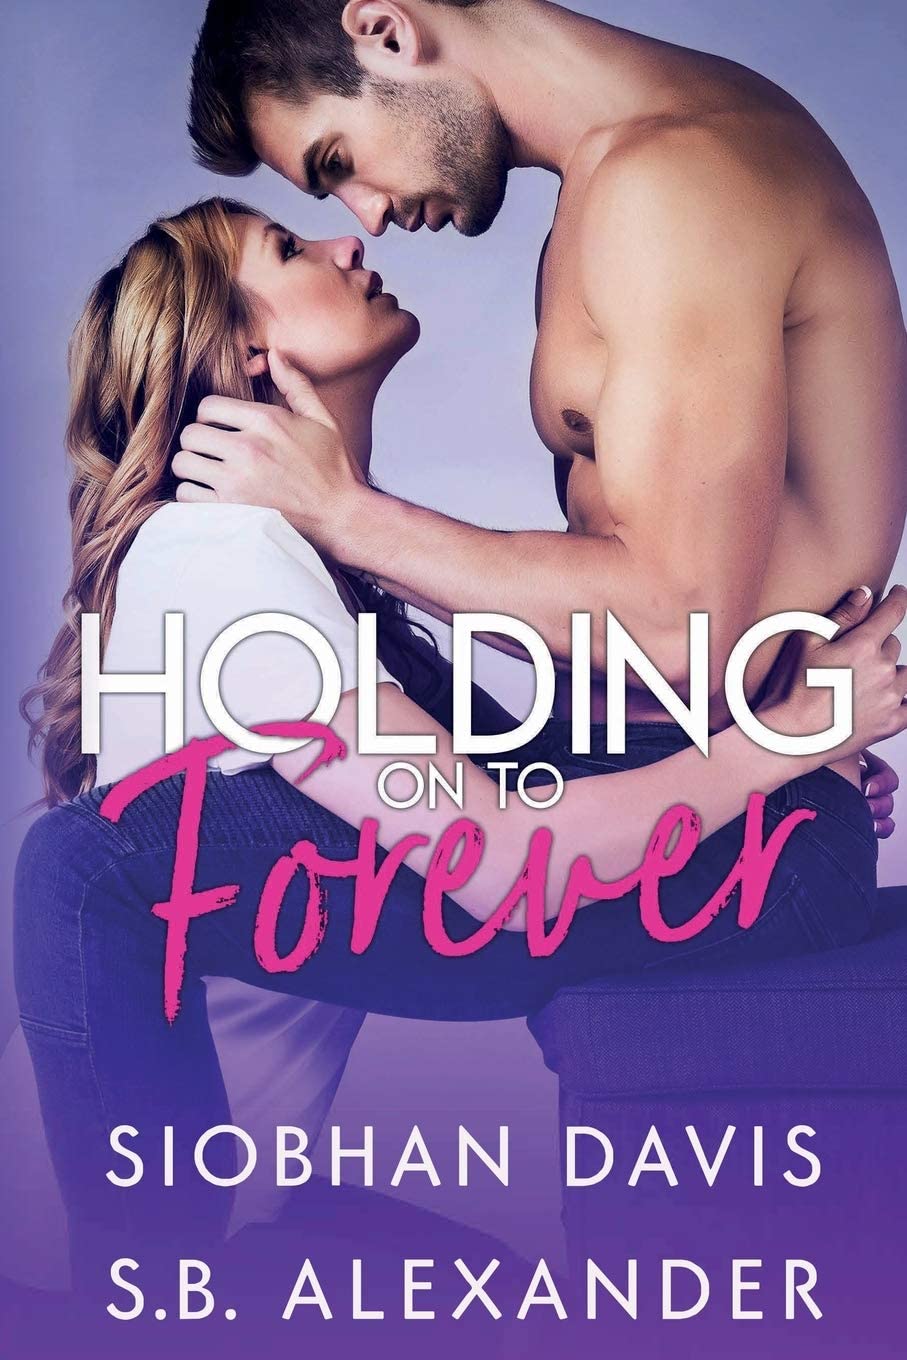 Holding on to Forever by Siobhan Davis and S.B. Alexander